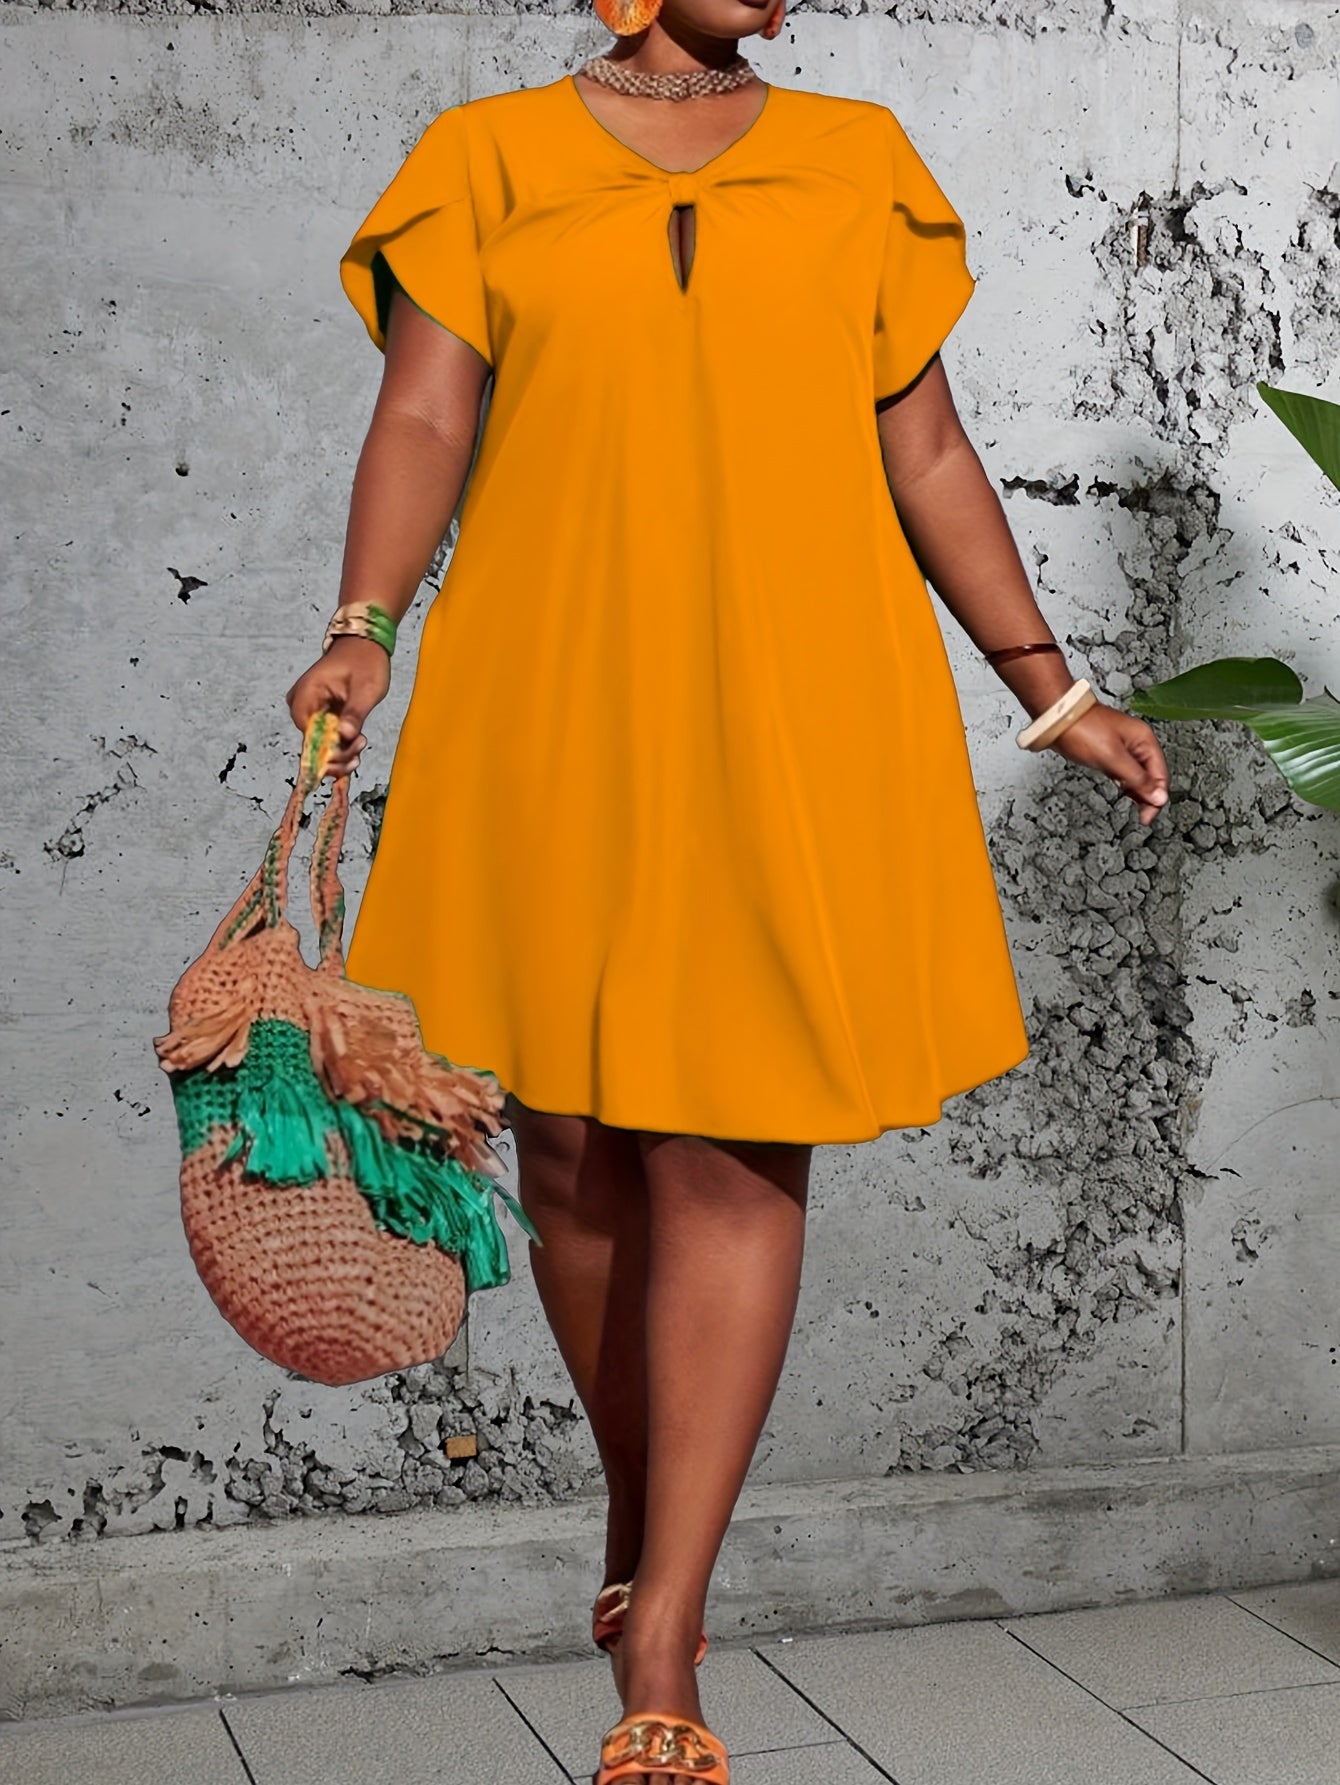 Flattering Plus Size Solid Keyhole Knot Dress - Fashionable Petal Sleeves - Comfortable Loose Fit for Spring & Summer - Curvy Womens Wardrobe Staple